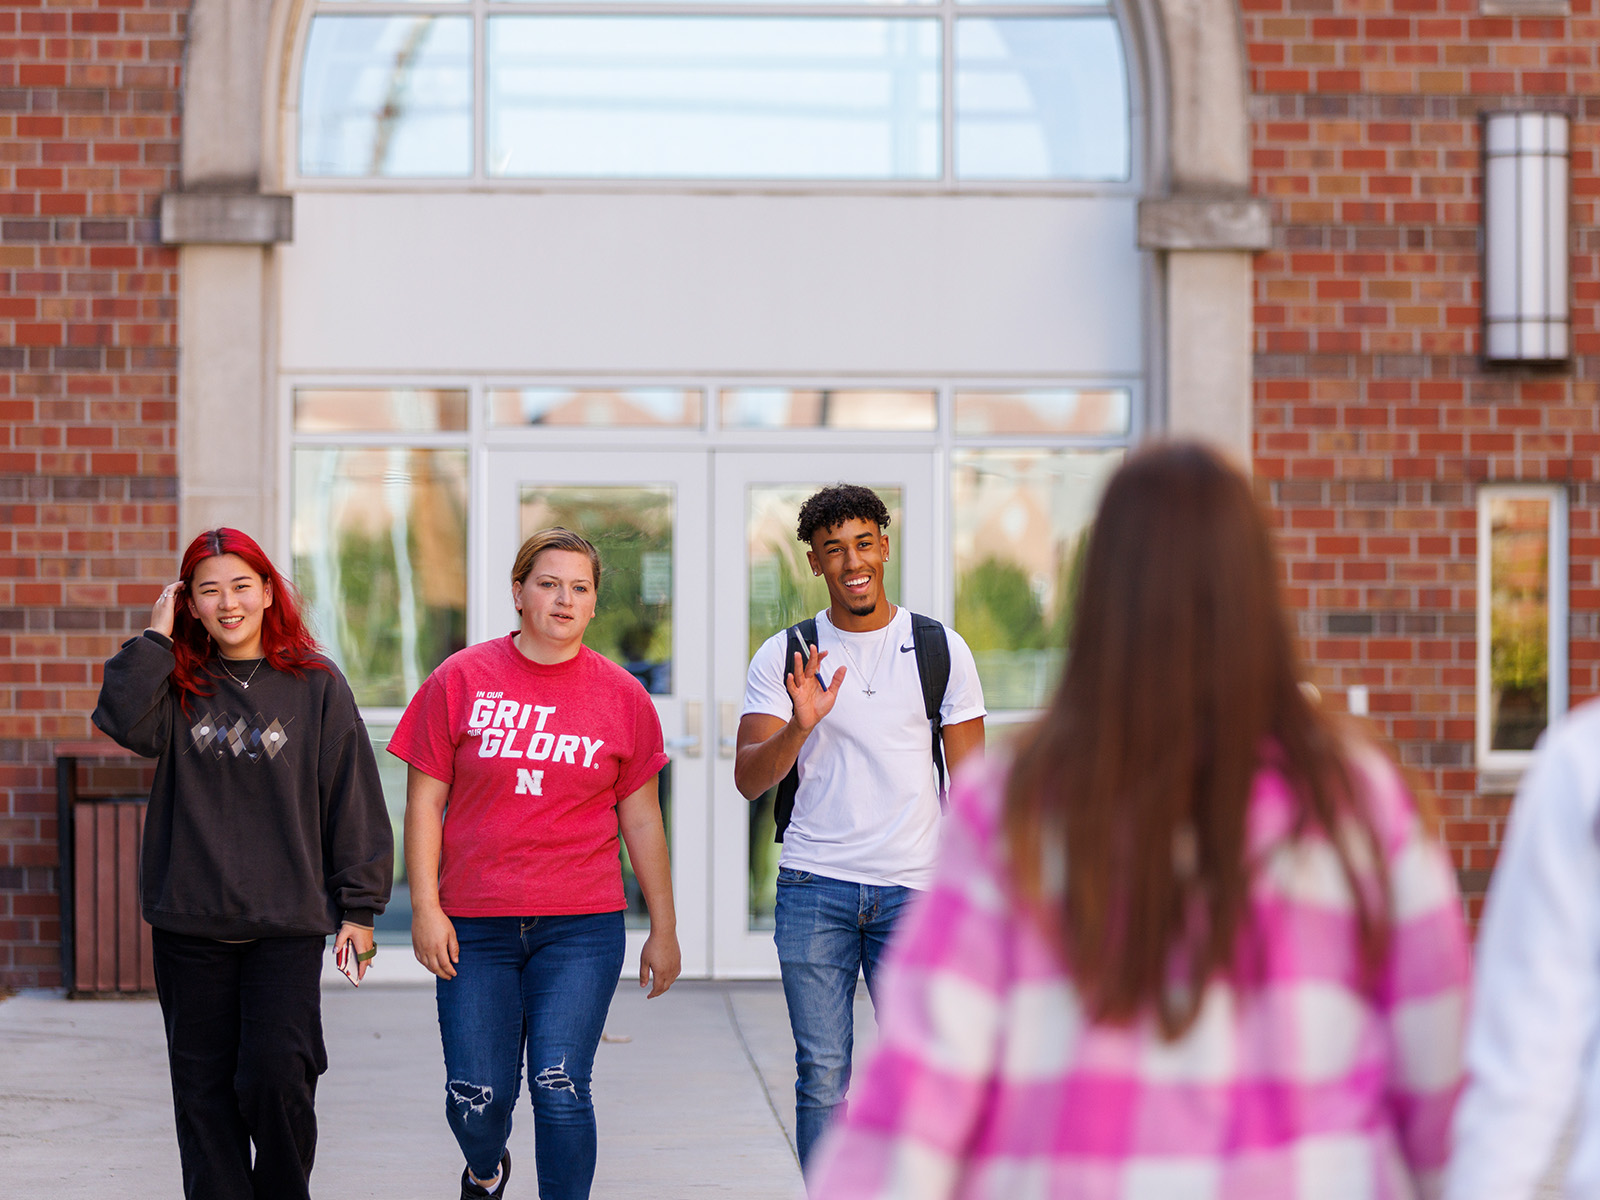 Living on campus gives students flexible options with less hassle.